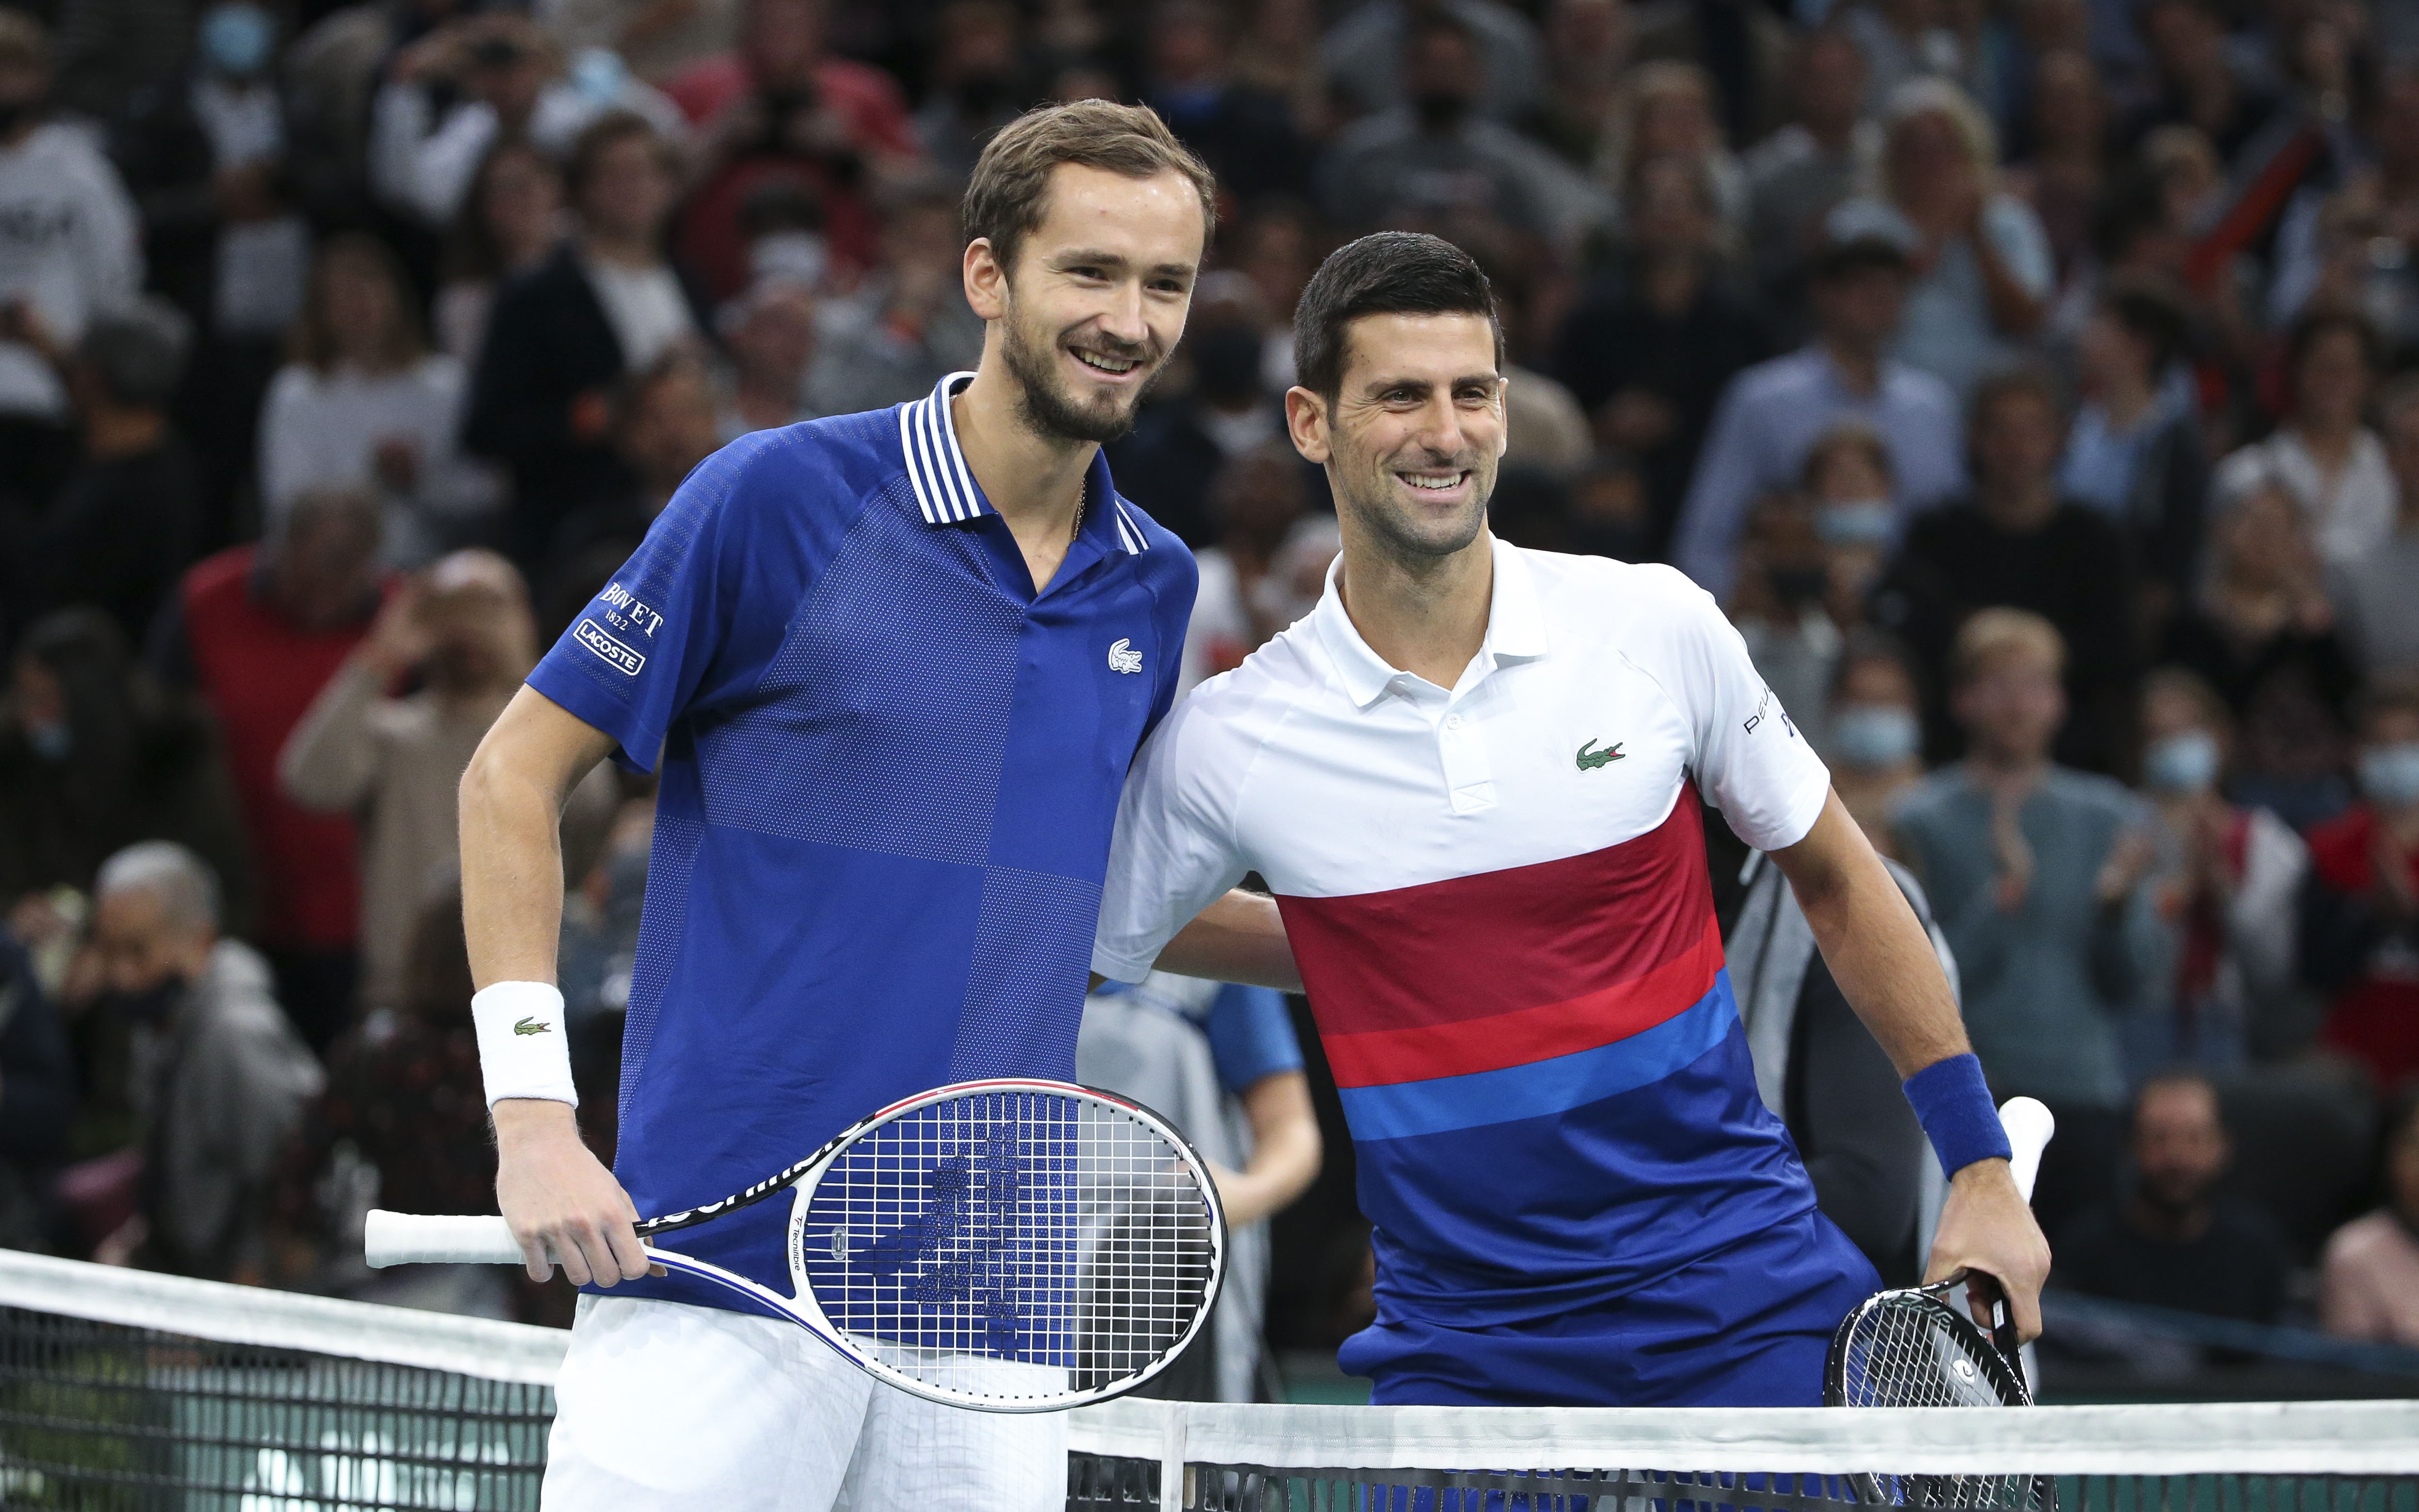 The Djokovic-Medvedev rivalry has quietly become one of the best rivalries in tennis This is the Loop GolfDigest